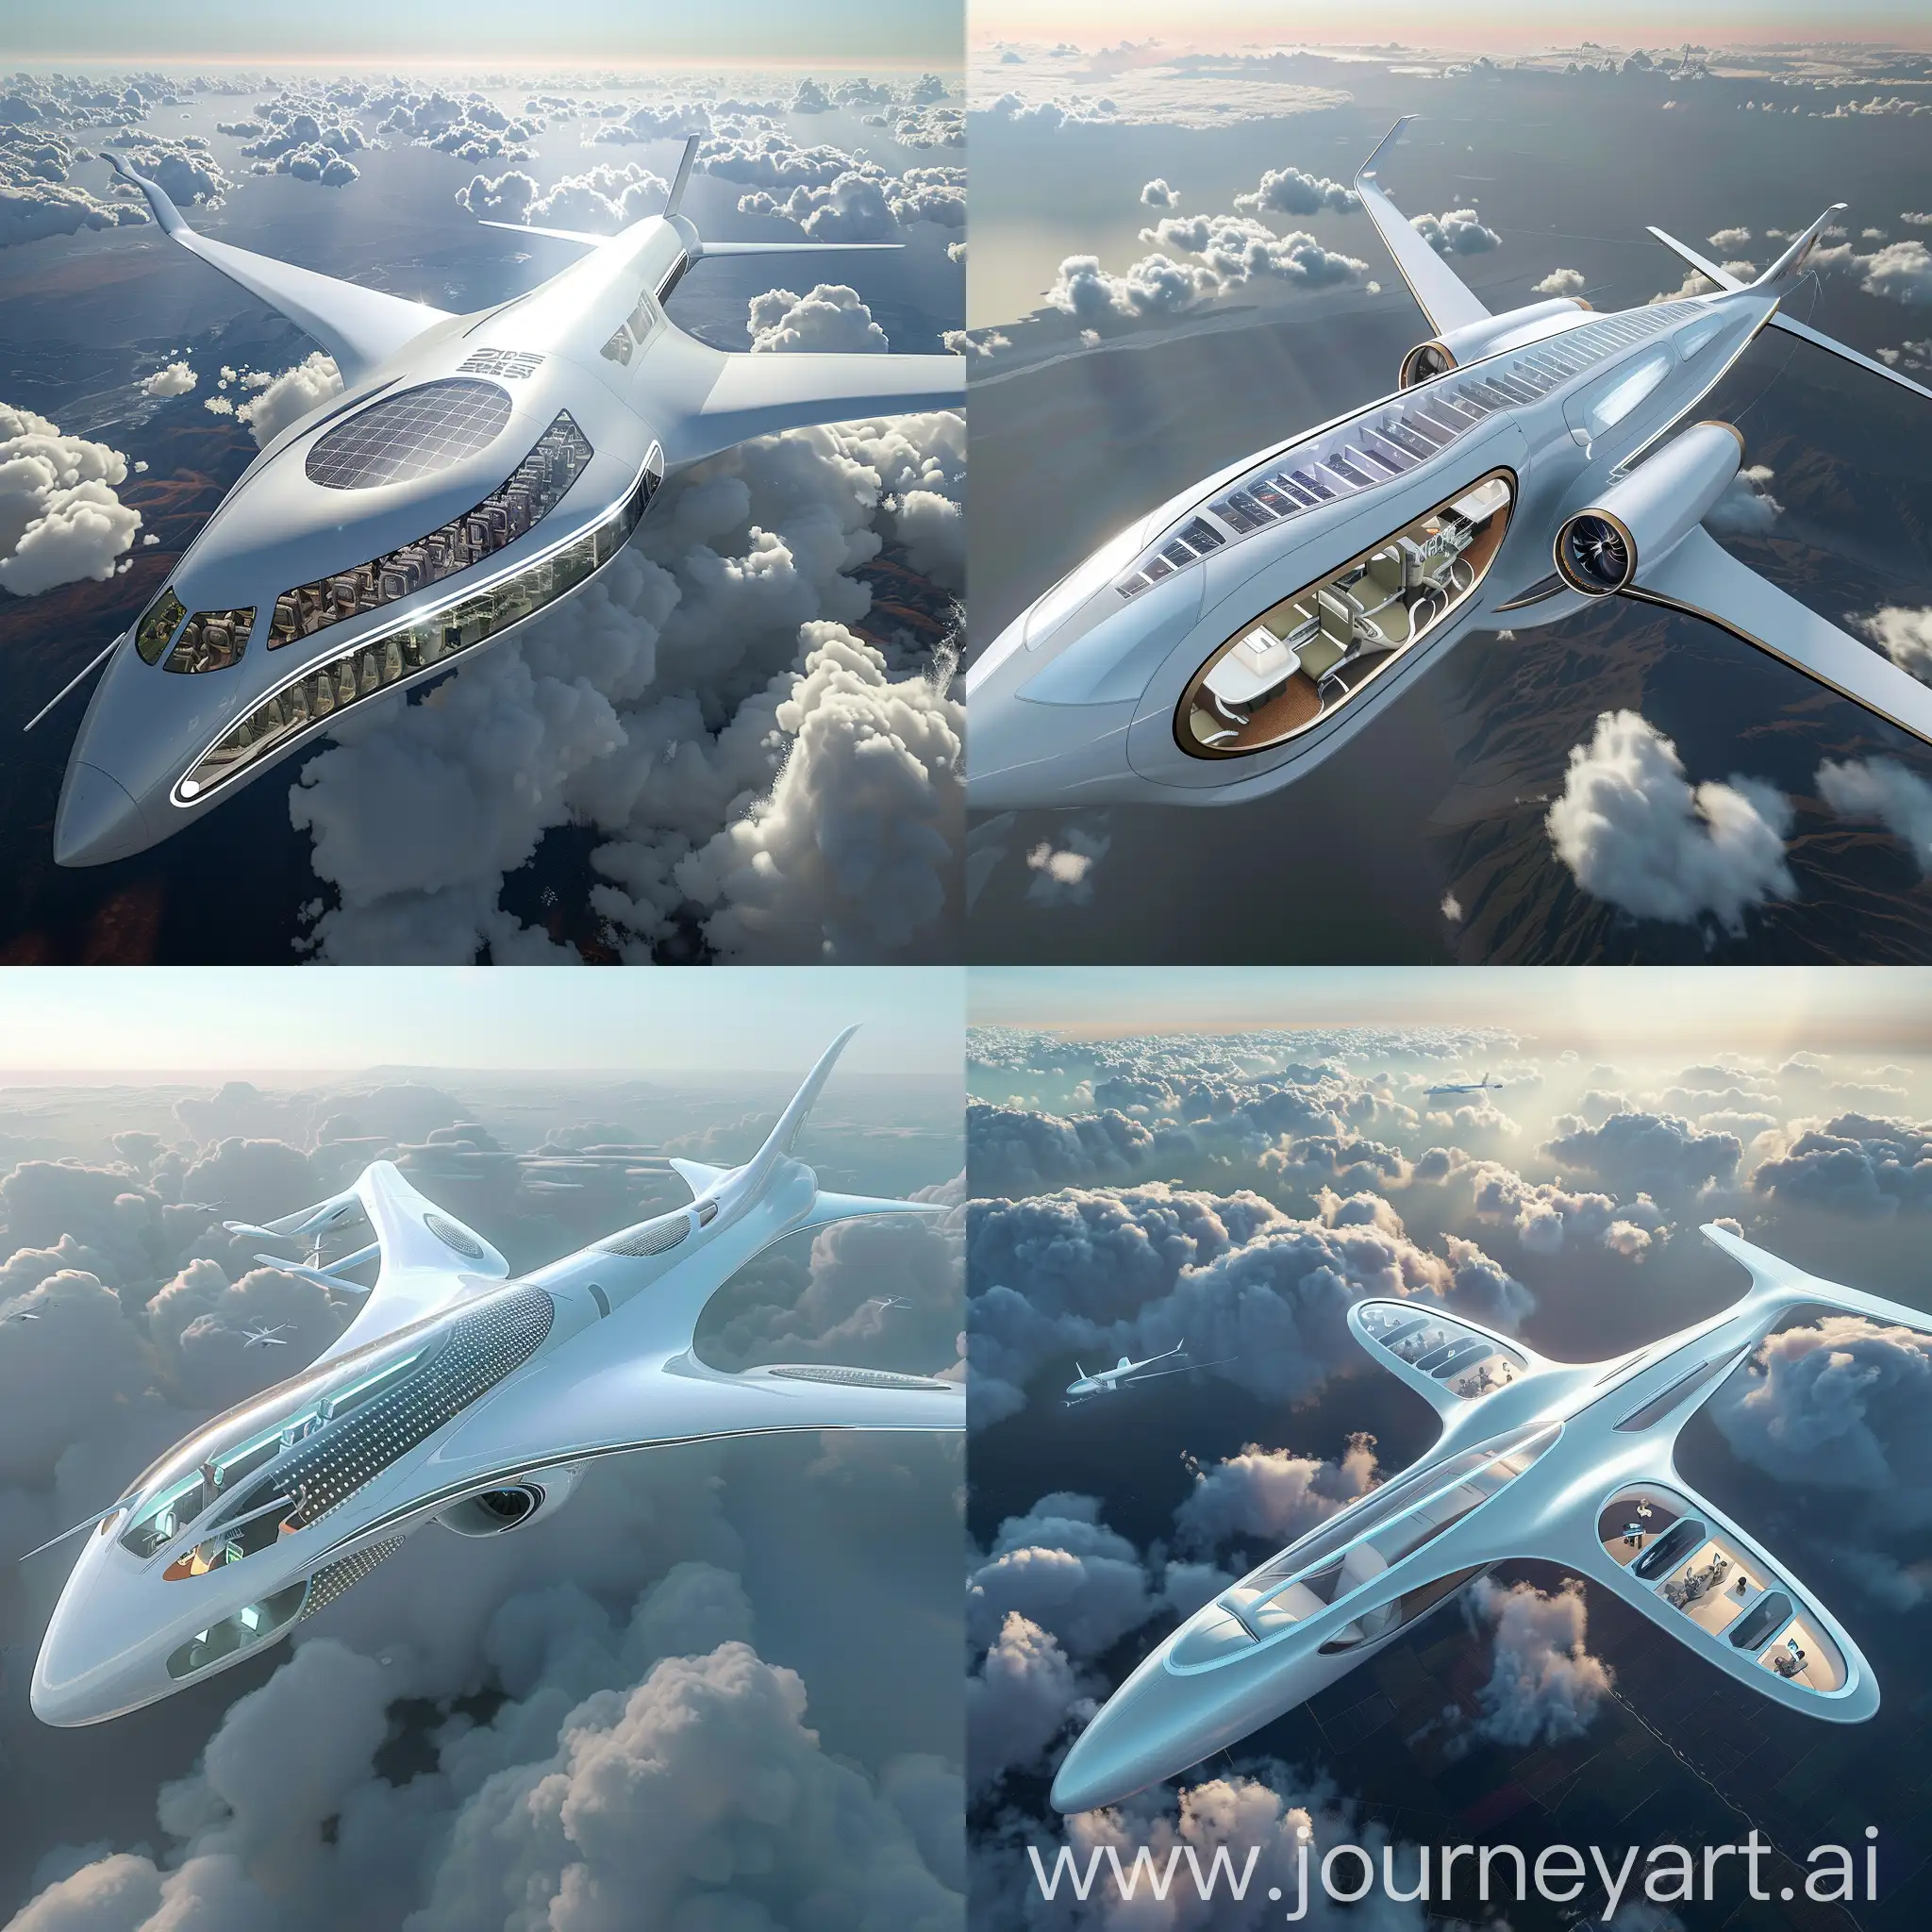 Futuristic-Passenger-Aircraft-with-Smart-Materials-and-Advanced-Features